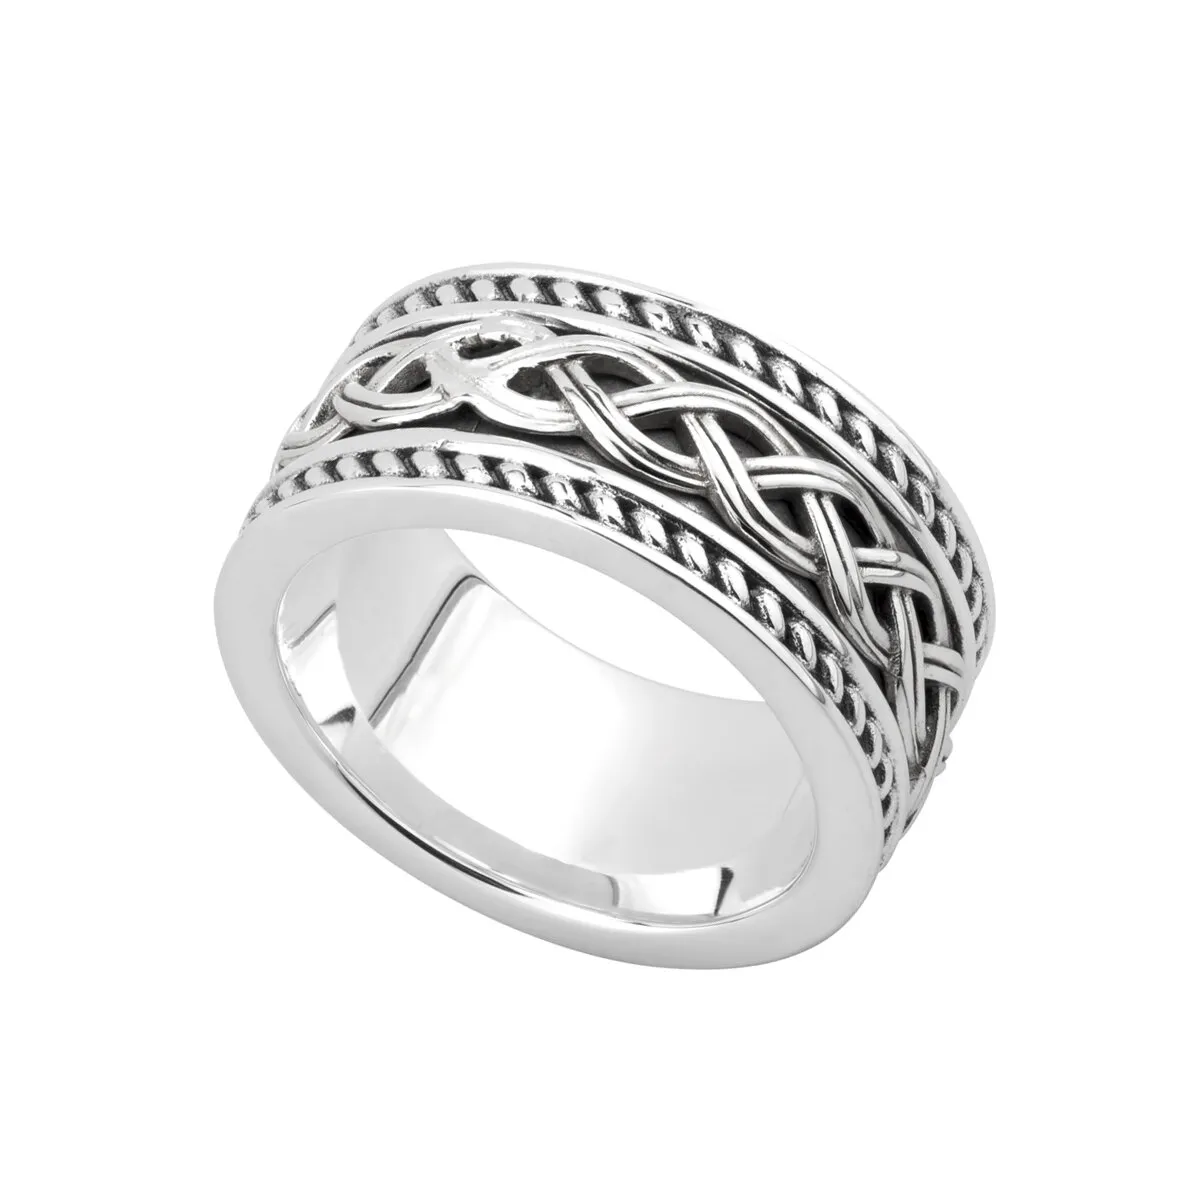 Mens Sterling Silver Celtic Knot Ring...